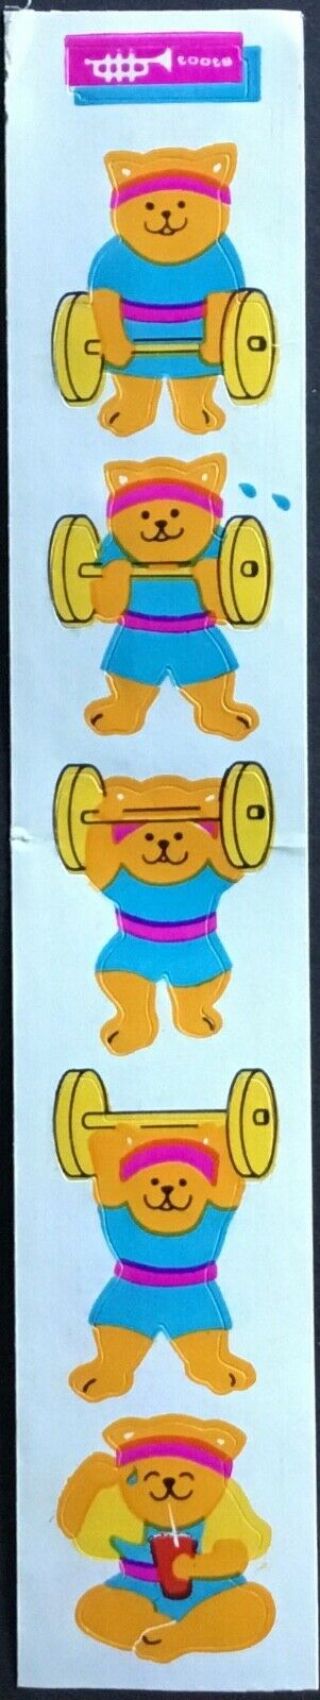 Vintage Stickers - Cardesign - Toots - Kitties Pump Iron - Dated 1984